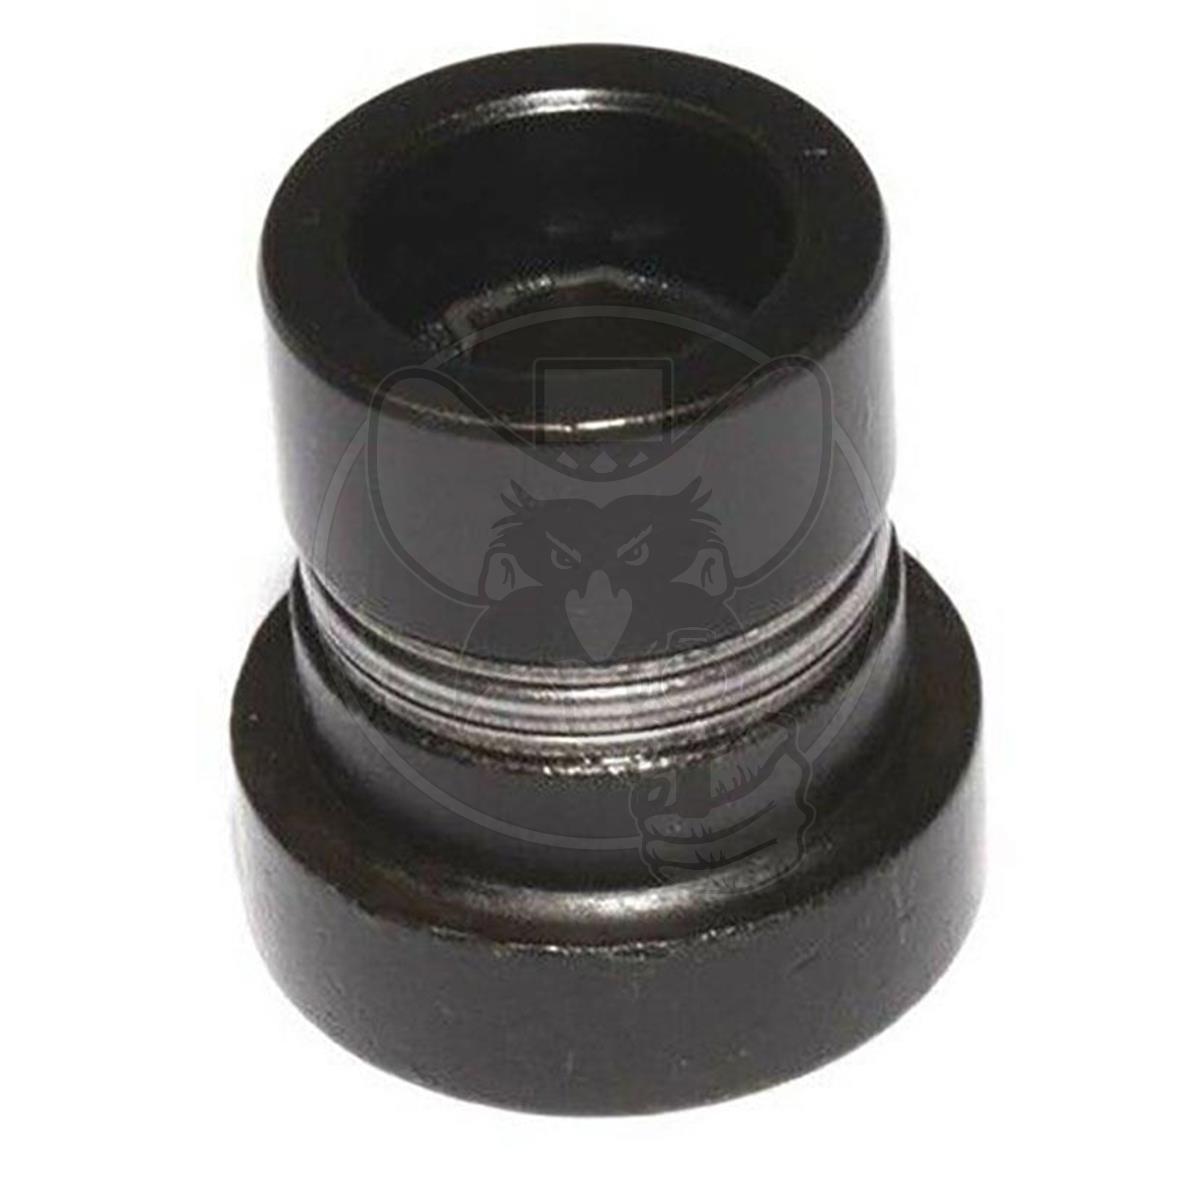 COMP CAMS ROLLER CAM BUTTON .795" LONG FITS SMALL BLOCK CHEV